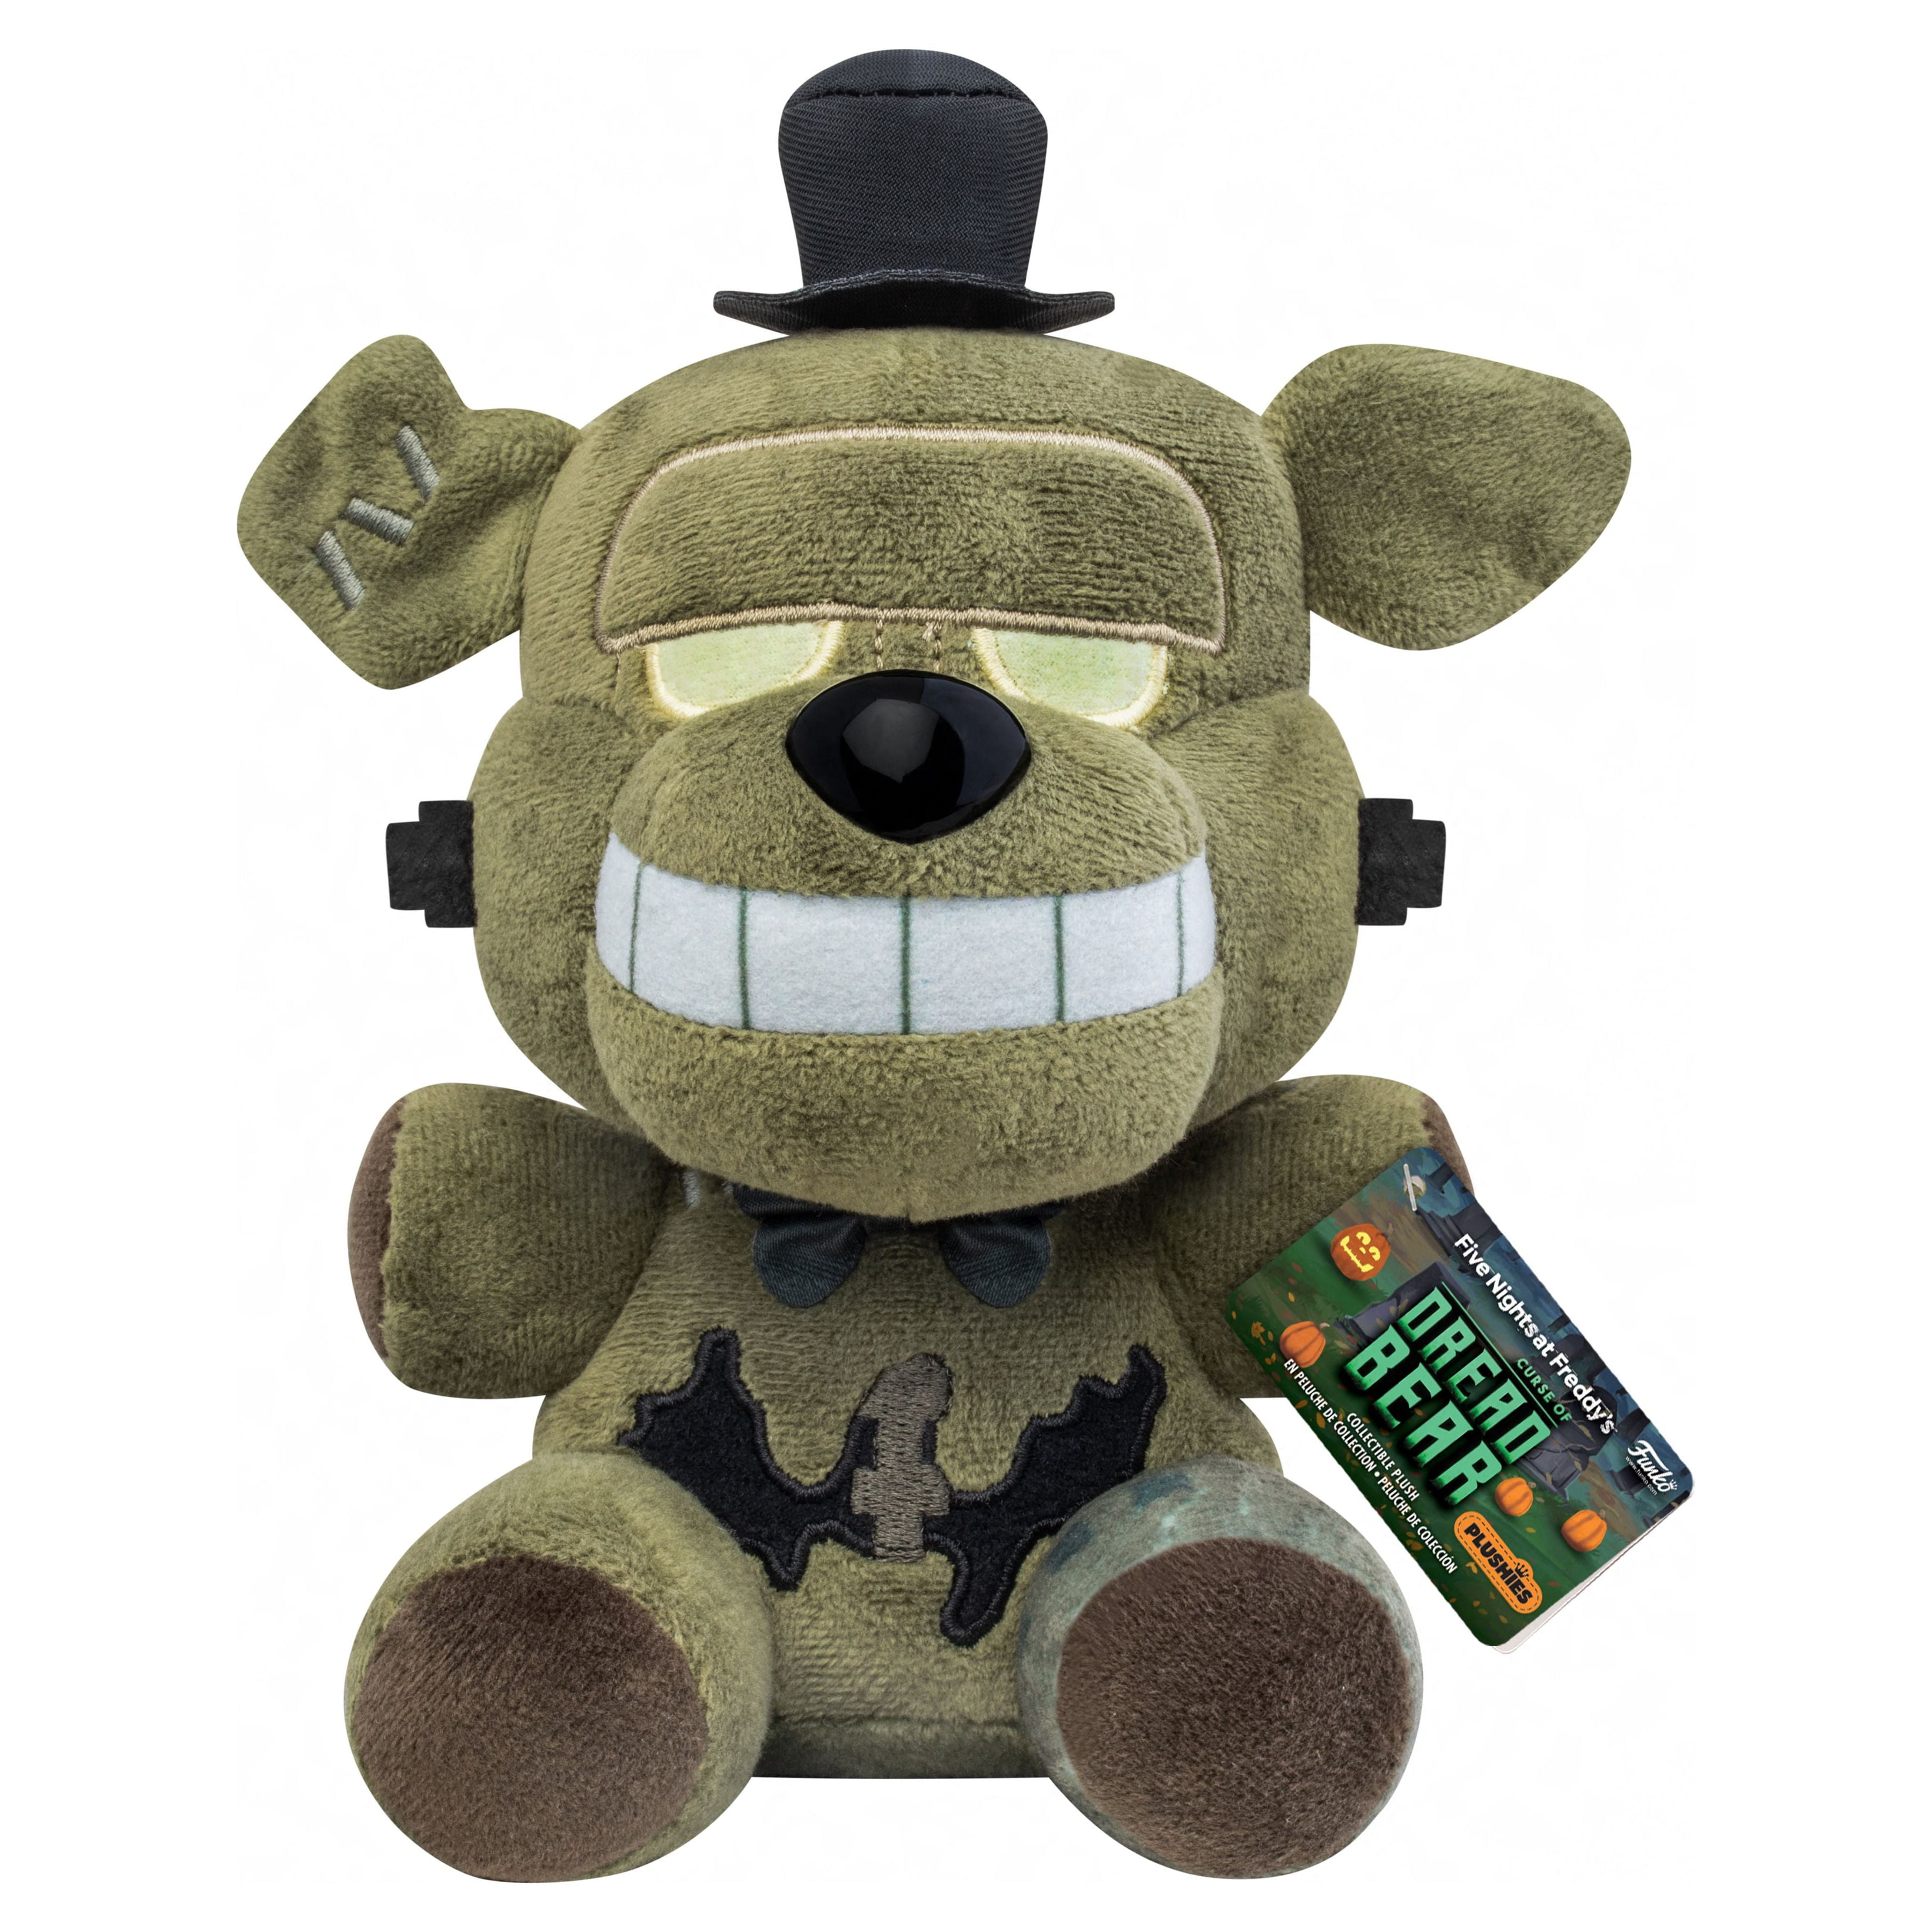 Five Nights At Freddy's Plush, FNAF Fox Plushies Gift for FNAF Plush Game  Fans 7 Inch